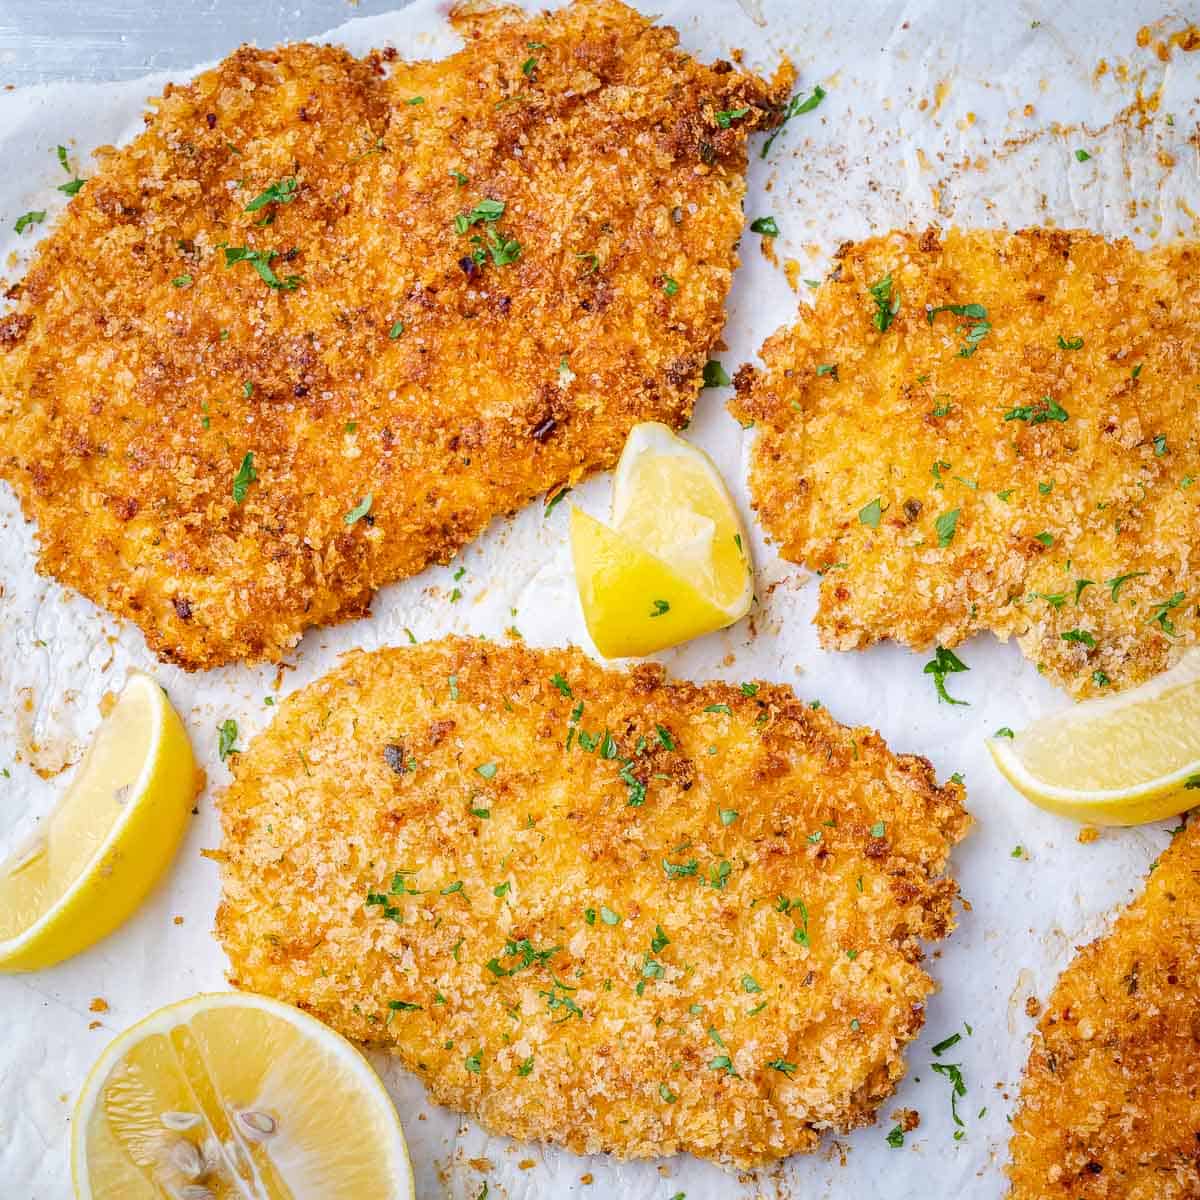 top view of crispy chicken cutlets with lemon wedges and parsley garnishes